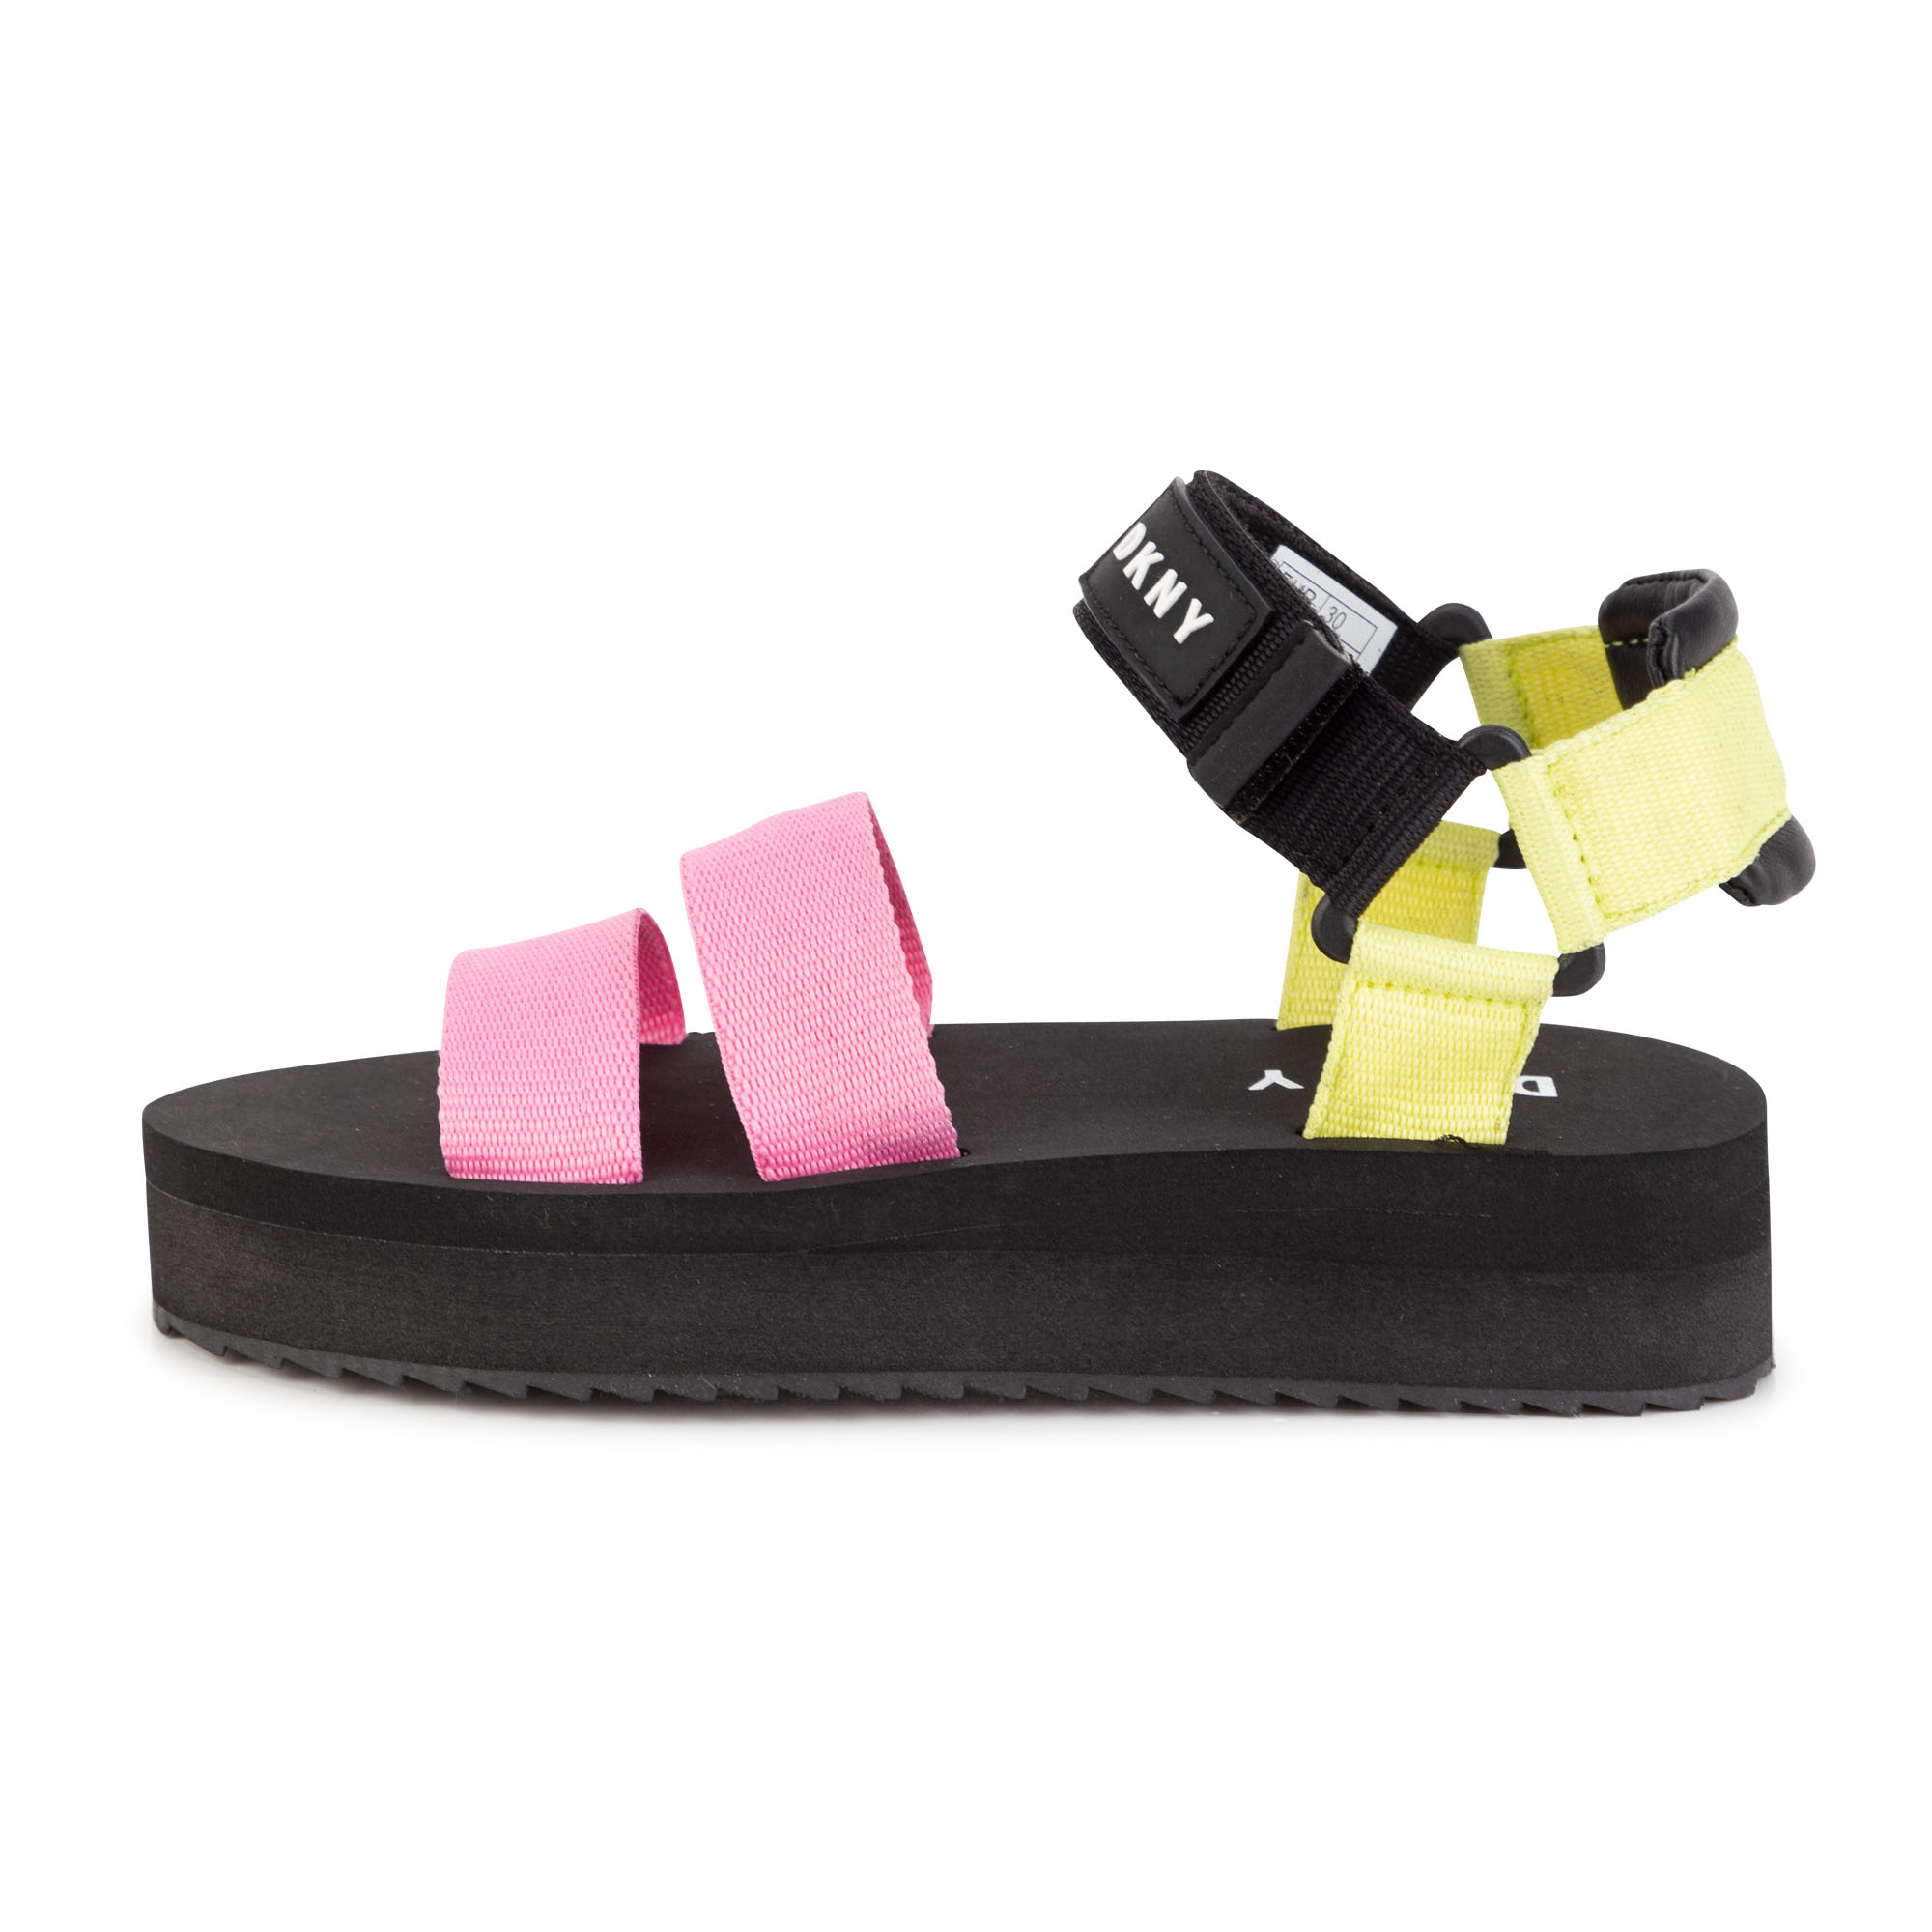 Hook-and-loop sandals DKNY for GIRL